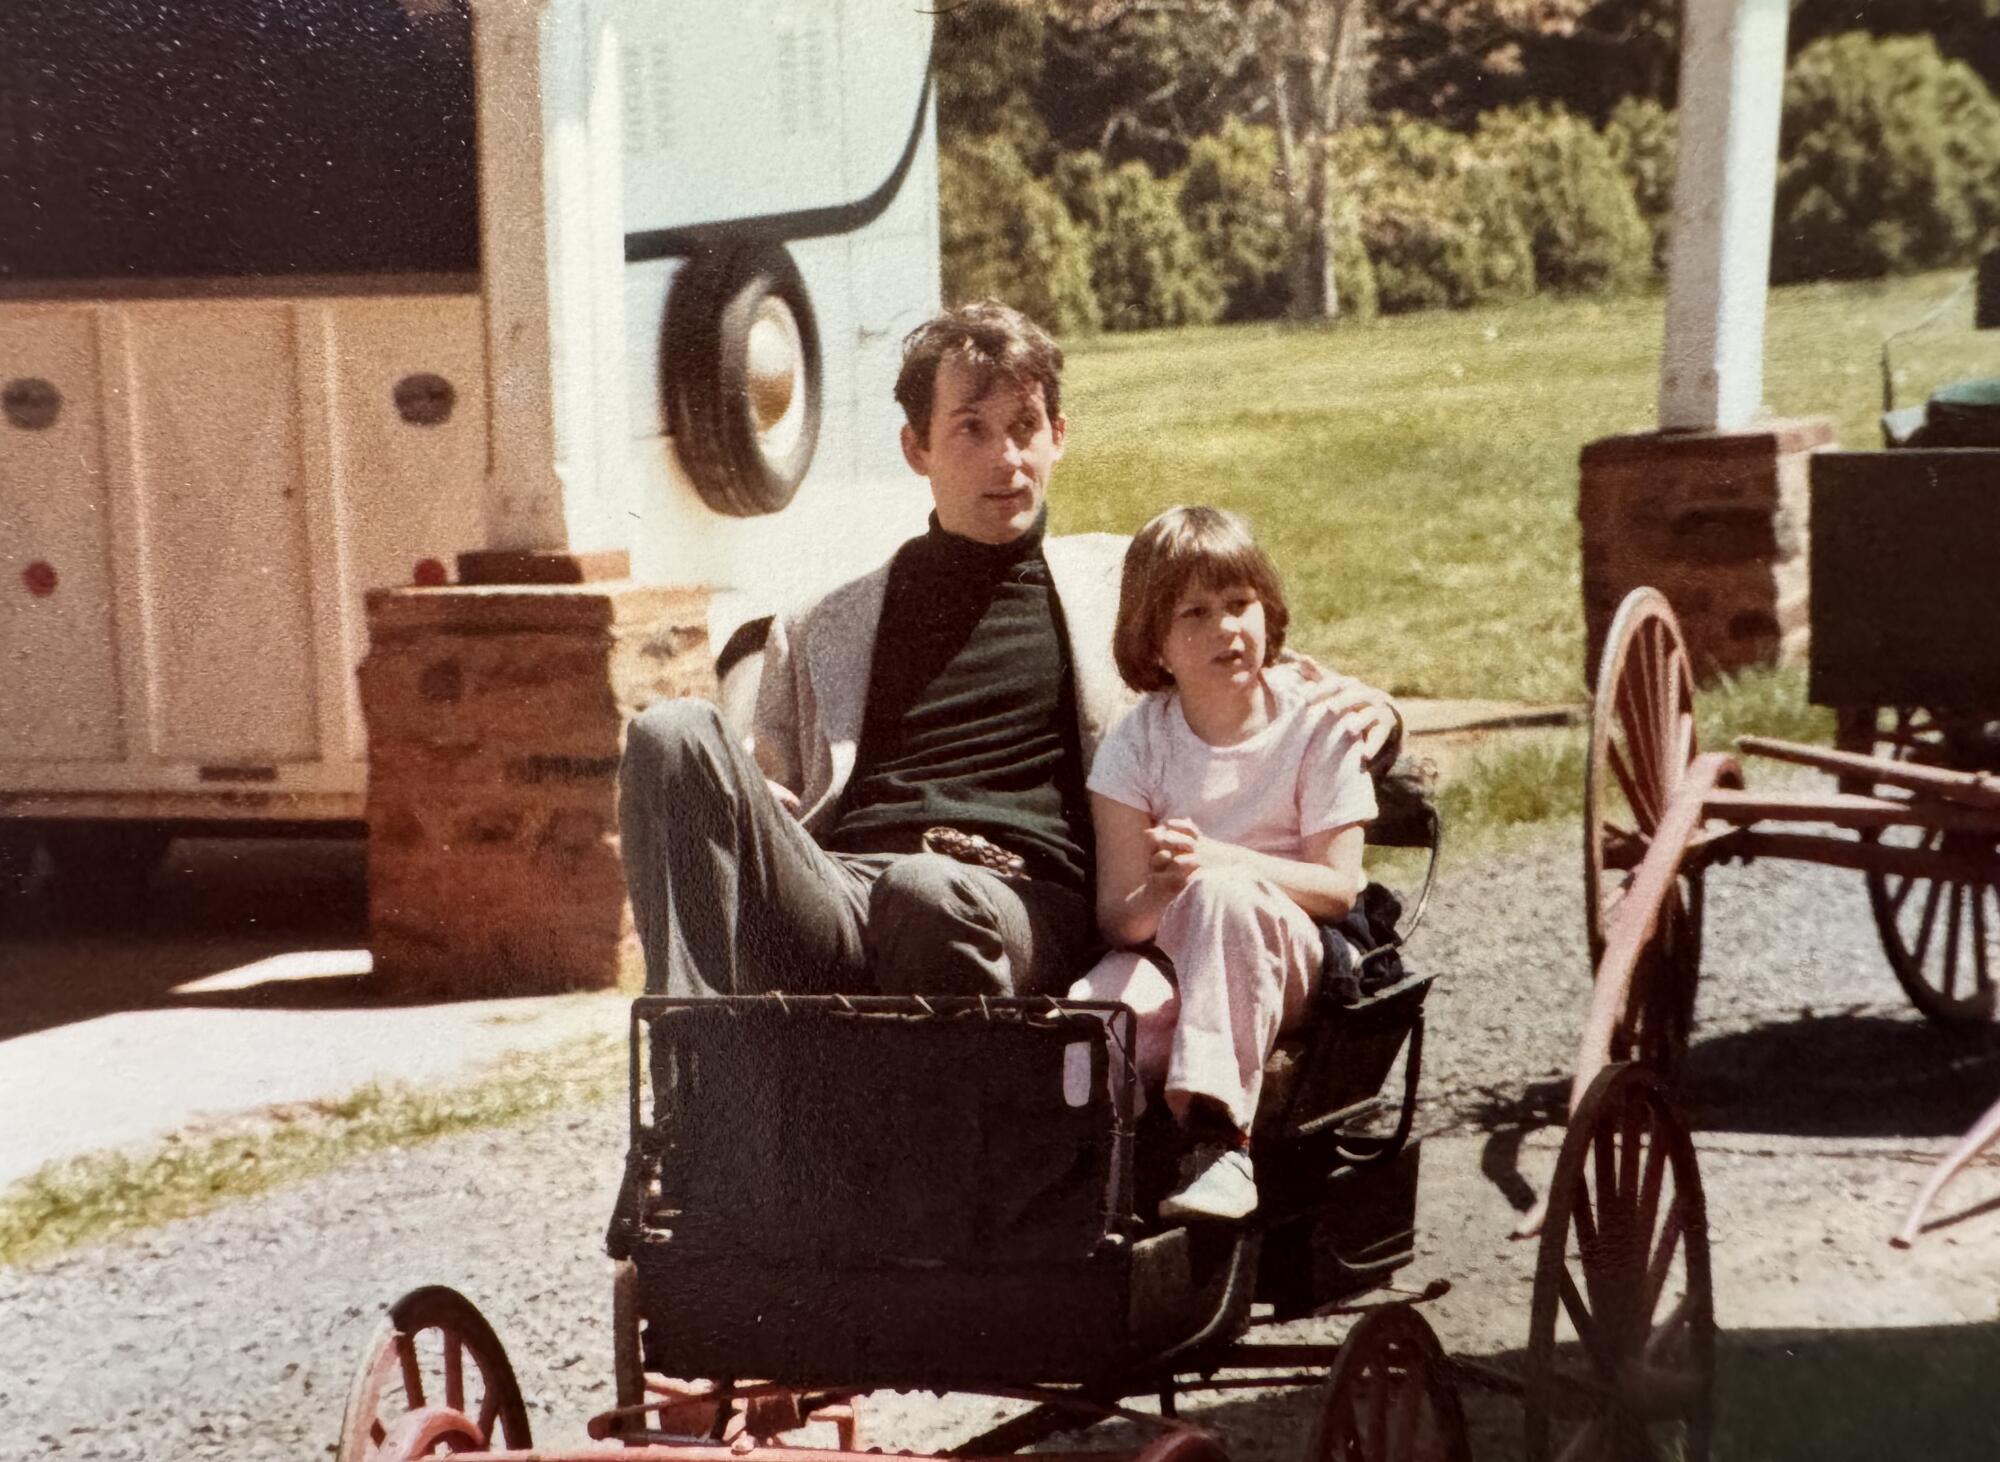 A father and daughter sit together in a cart.  